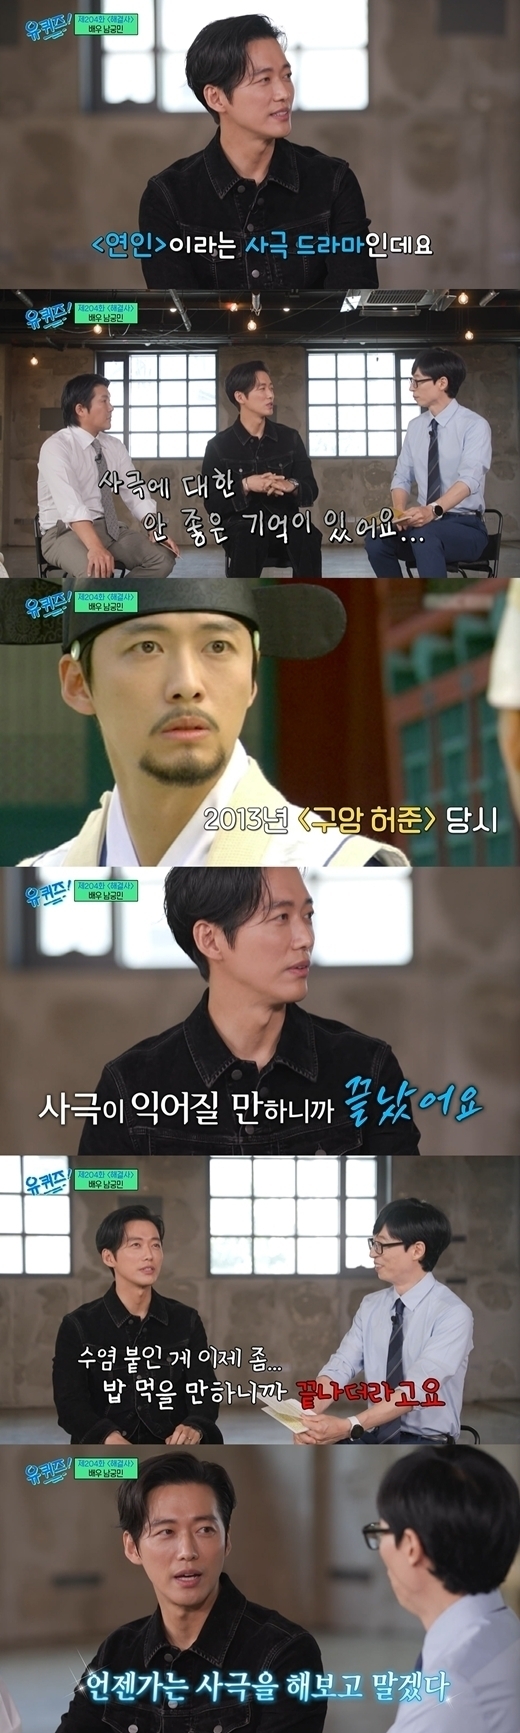 Actor Namgoong Mins prospect of winning the MBC Acting Grand Prize has become even clearer.MBC Gold Drama Couple to Saint Patricks Day2 in double-digit TV viewer ratings to prove again the power.TV Viewer ratings are on the upswing.Couple, Namgoong Mins Hot Summer Days as Yizhang County Station, finished with 12.2% of its best TV viewer ratings in the last episode of Saint Patricks Day1, and then resumed with Saint Patricks Day2 with a blank space of about one month.Initially, Saint Patricks Day2 started with a slight decline of 7.7% (11 episodes), but it rose to 10.2% (13 episodes) in 3 episodes, followed by another increase to 11.7% in 14 episodes.Saint Patricks Day2 is on the rise in TV viewer ratings every time it is broadcast.The difference from the existing top TV viewer ratings is also narrowed to 0.5% P, and it is observed that the top TV viewer ratings are about to be renewed.The competition with the competition is already ahead of Couple with a big gap.In the case of Couple Saint Patricks Day2 in the beginning, it was difficult to predict the competition of TV viewer ratings because it was confronted with Kim Soon-oks SBS drama Escape of Seven.However, while Couple Saint Patricks Day2 has risen steadily, Escape of the Seven has fallen to 5.7% since the competition with Couple Saint Patricks Day2 began.The existing lowest TV viewer ratings of Escape of the Seven were 5.6%.In particular, Couple Saint Patricks Day2 broadcast on the 21st recorded 11.7% and Escape of 7 recorded 5.7%, respectively, and Couple Saint Patricks Day2s TV viewer ratings exceeded Escape of 7 .Namgoong Mins Hot Summer Days are among the most successful.Thanks to Namgoong Mins ability to freely move between charisma and charisma, many Couple viewers continue to respond that Namgoong Mins acting is fun.The lives of Yizhang County and Yu Gil-chae (Ahn Eun-jin), divided by tragic love and fate, are at the heart of the Couple, especially in the last broadcast, Yizhang County rushes to save Yu Gil-chaes life and says, Gil-chae!The scene of crying is considered to be one of the scenes that made many viewers fall into admiration and sadness at the same time.In this years MBC Drama, there is no actor comparable to Namgoong Min, which is why Namgoong Min is considered to be the best candidate for the MBC Acting Grand Prize this year.If Namgoong Min wins the trophy this time, it will be the first trophy recapture in just two years following the MBC Acting Grand Prize, which was awarded as MBCs Black Sun in 2021.The fact that Namgoong Min was a 10-year history challenge after MBC Guam Hur Jun in 2013 also makes his Hot Summer Days stand out.Namgoong Min appeared on tvN Yu Quiz on the Block before the Couple broadcast and said, I have a history for a long time. In fact, I have a bad memory of history. At the time, Namgoong Min said, When I first did History, I was a rookie, and I did not have a lot of speech or acting in History. I shot History for about six months to a year.I thought that one day I would try the history again, but it was an opportunity, he said.It is the Couple that Namgoong Min perfectly captures the opportunity that has been going on for 10 years.